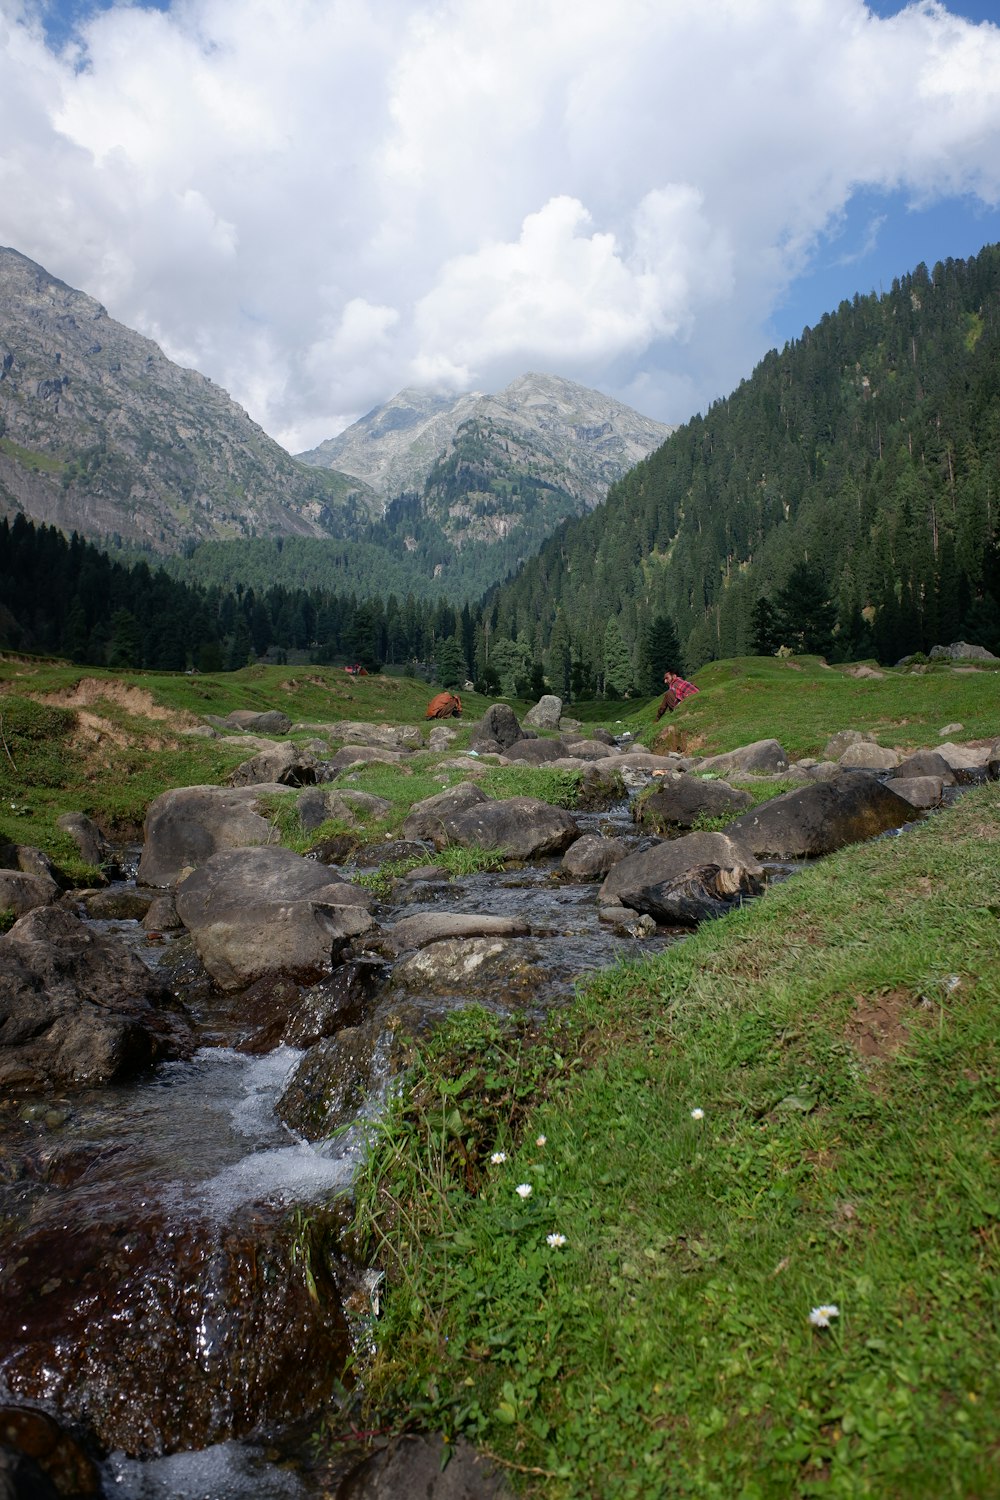 a stream running through a grassy area with mountains in the background